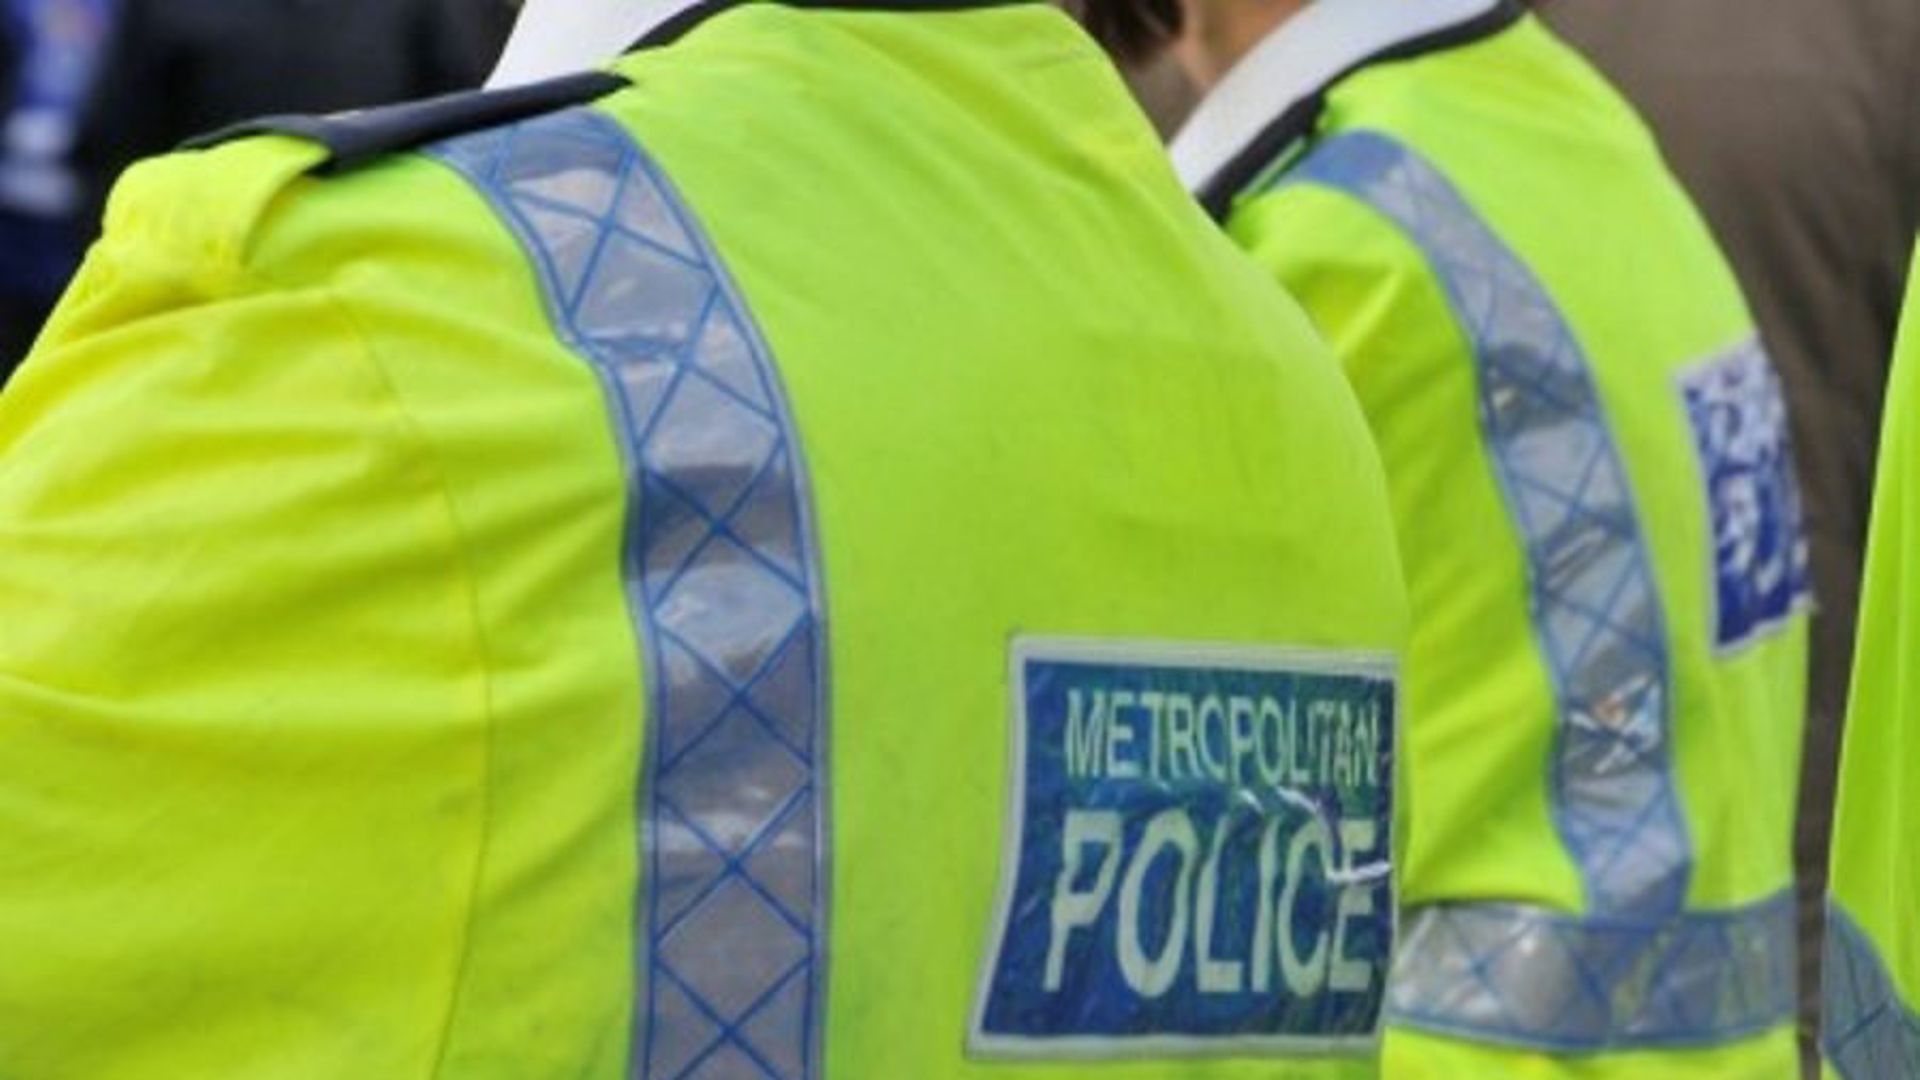 Teen 'critical' after Ilford Lane stabbing, police say